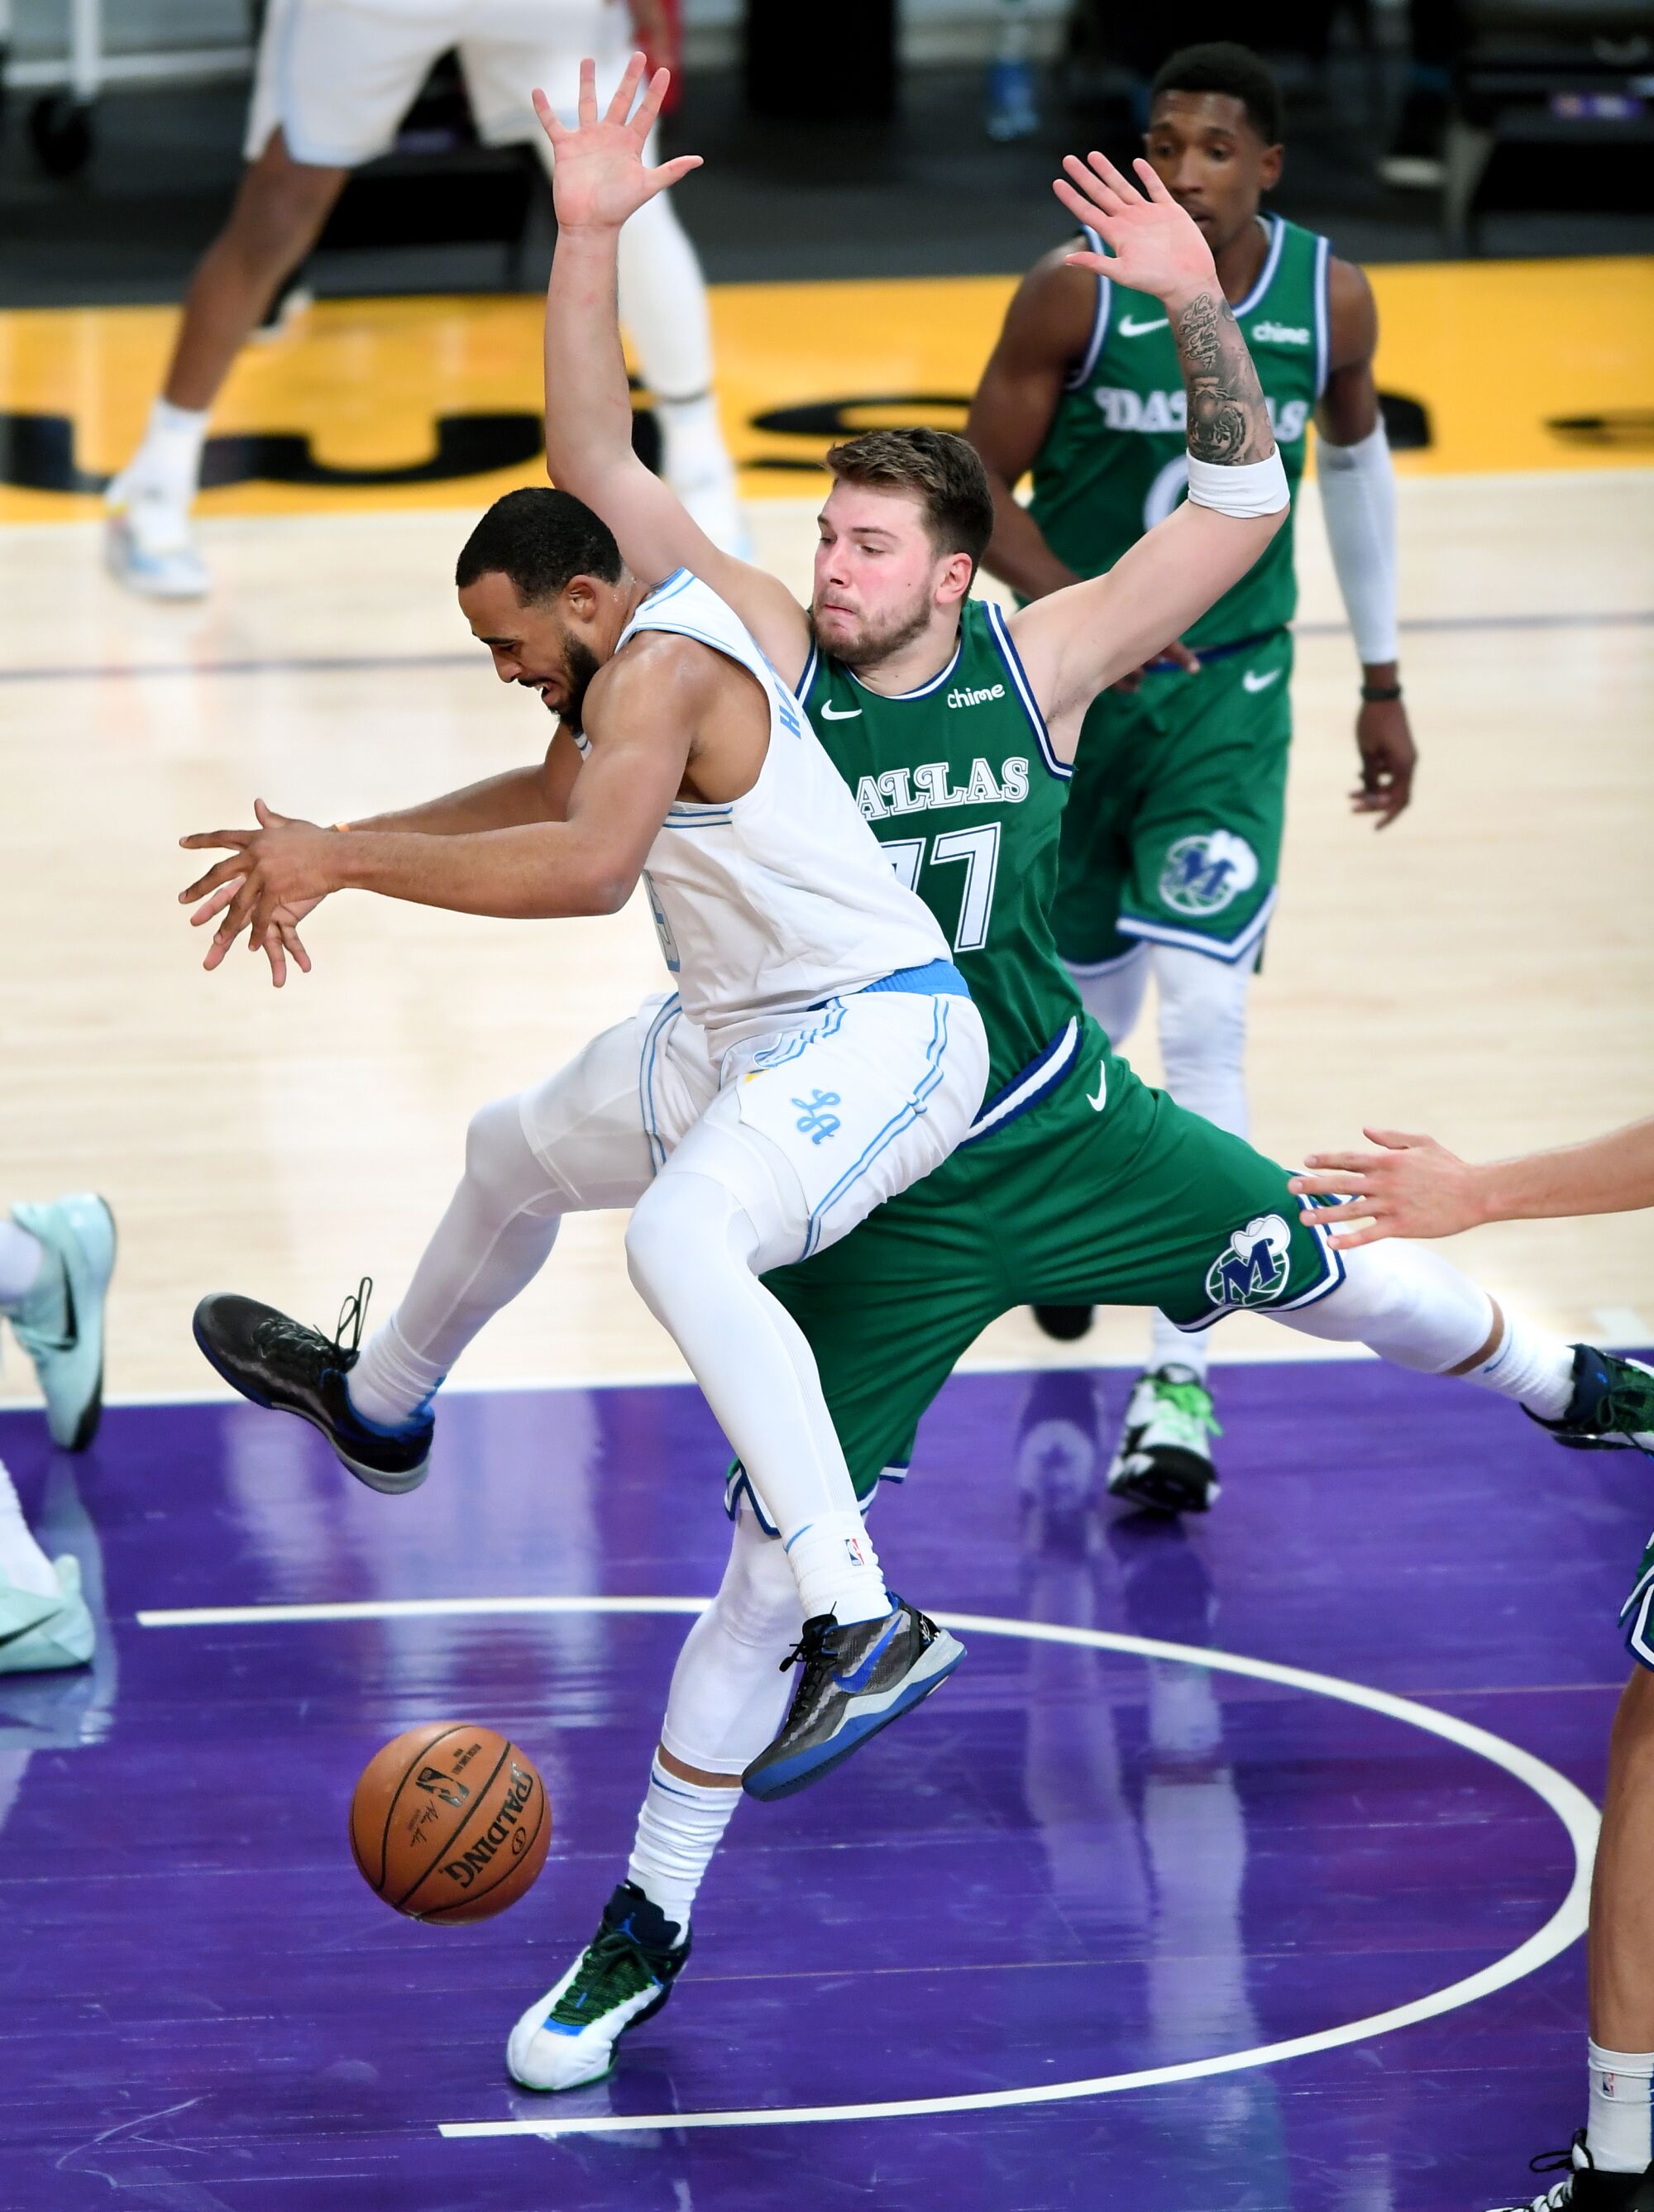 Lakers guard Talen Horton-Tucker loses the ball in front of Mavericks guard Luka Doncic during the second quarter.